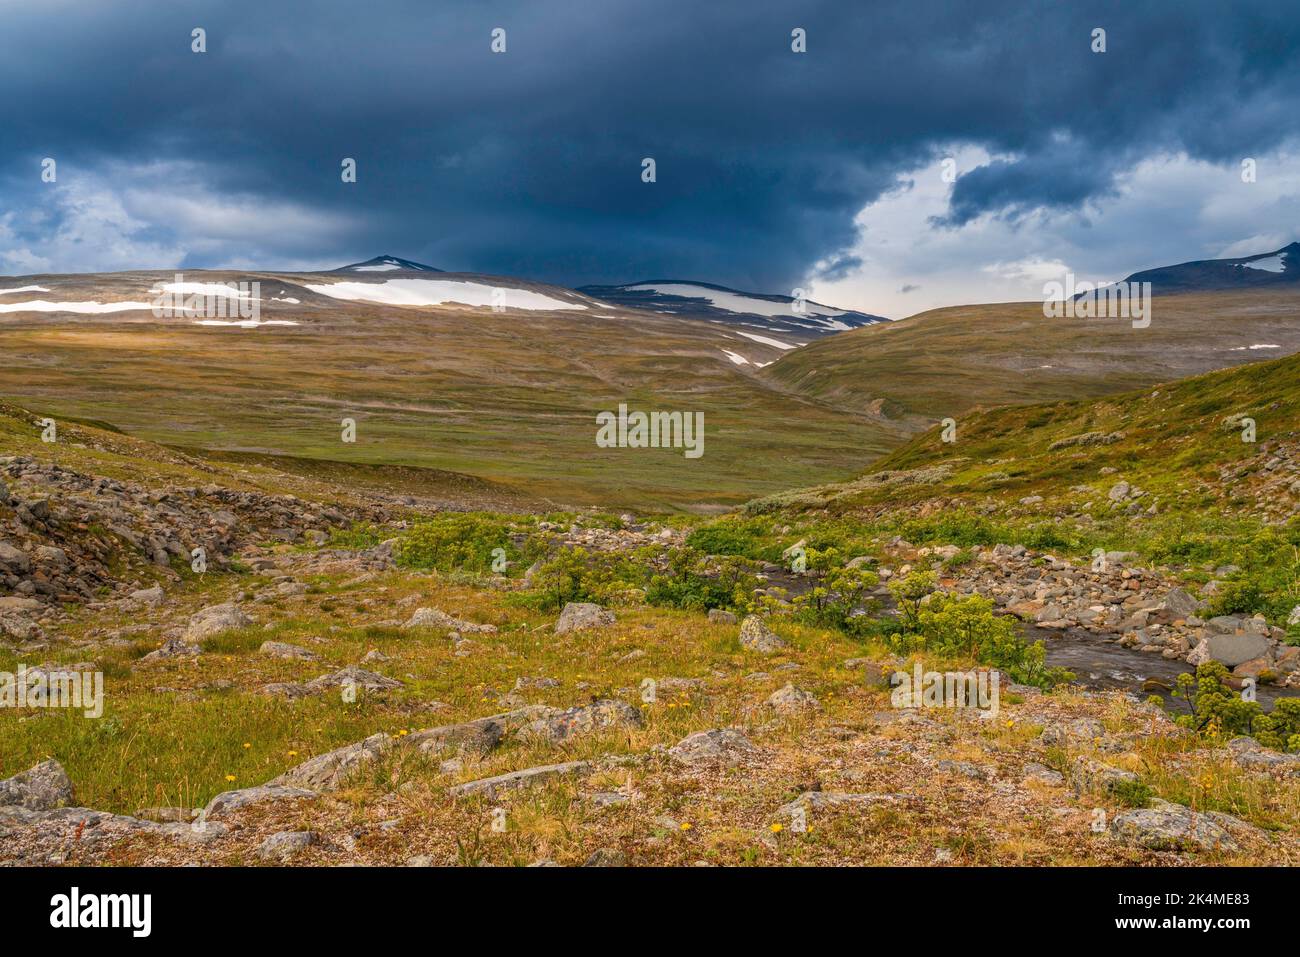 Creek along kings trail with rocks, garden angelica growing along the sides, mountain with snow in background, Swedish Lapland, Sweden. Stock Photo